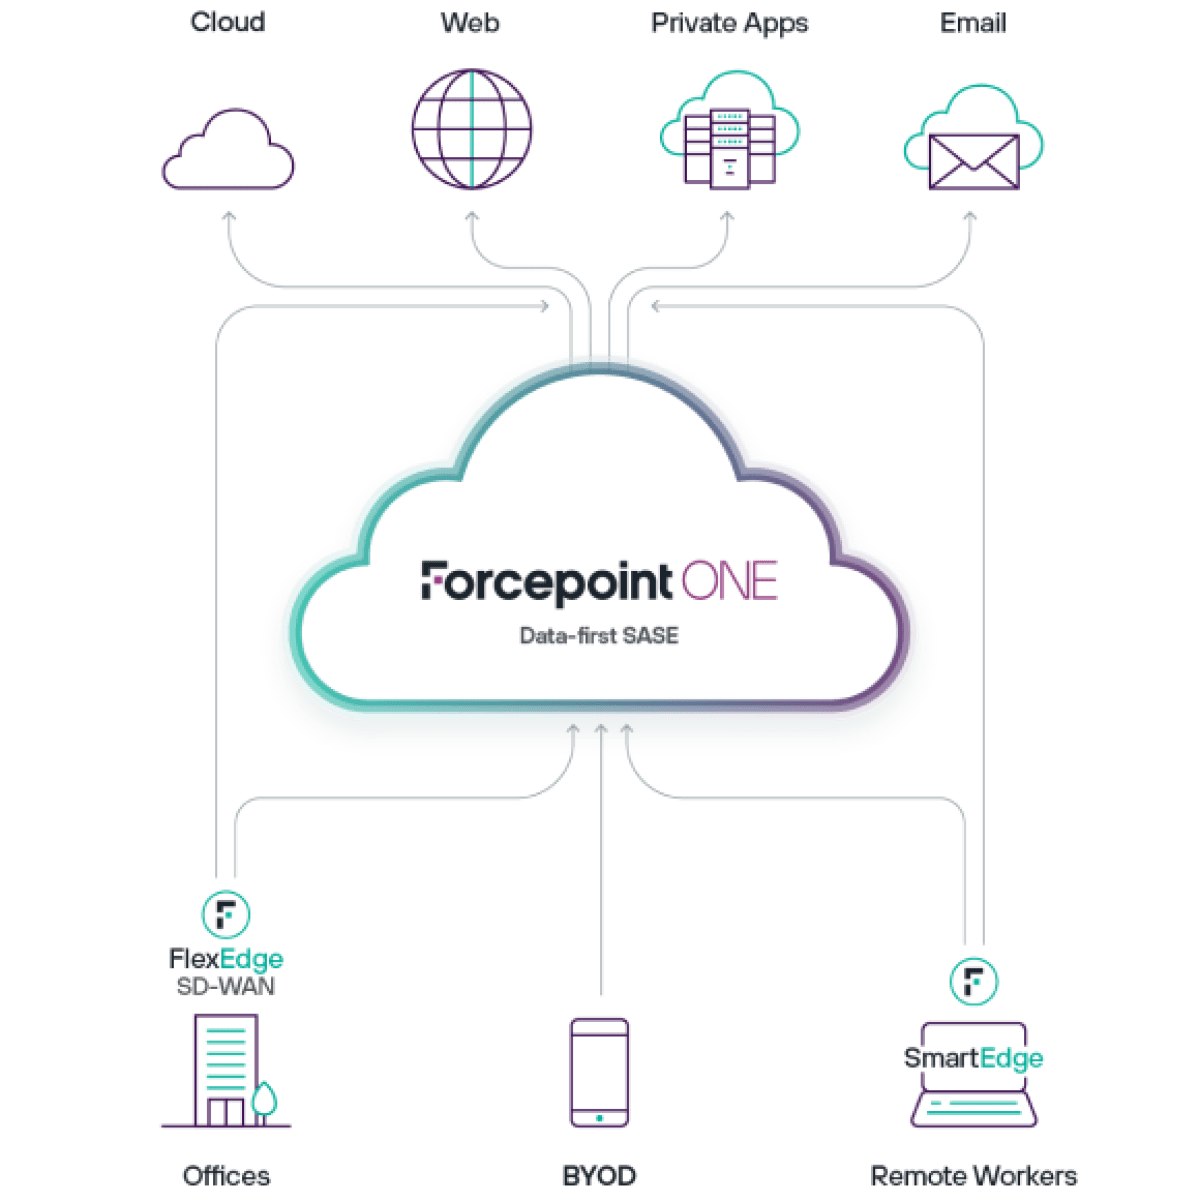 Forcepoint delivers Data-first SASE through the Forcepoint ONE SSE cloud security platform and FlexEdge Secure SD-WAN.